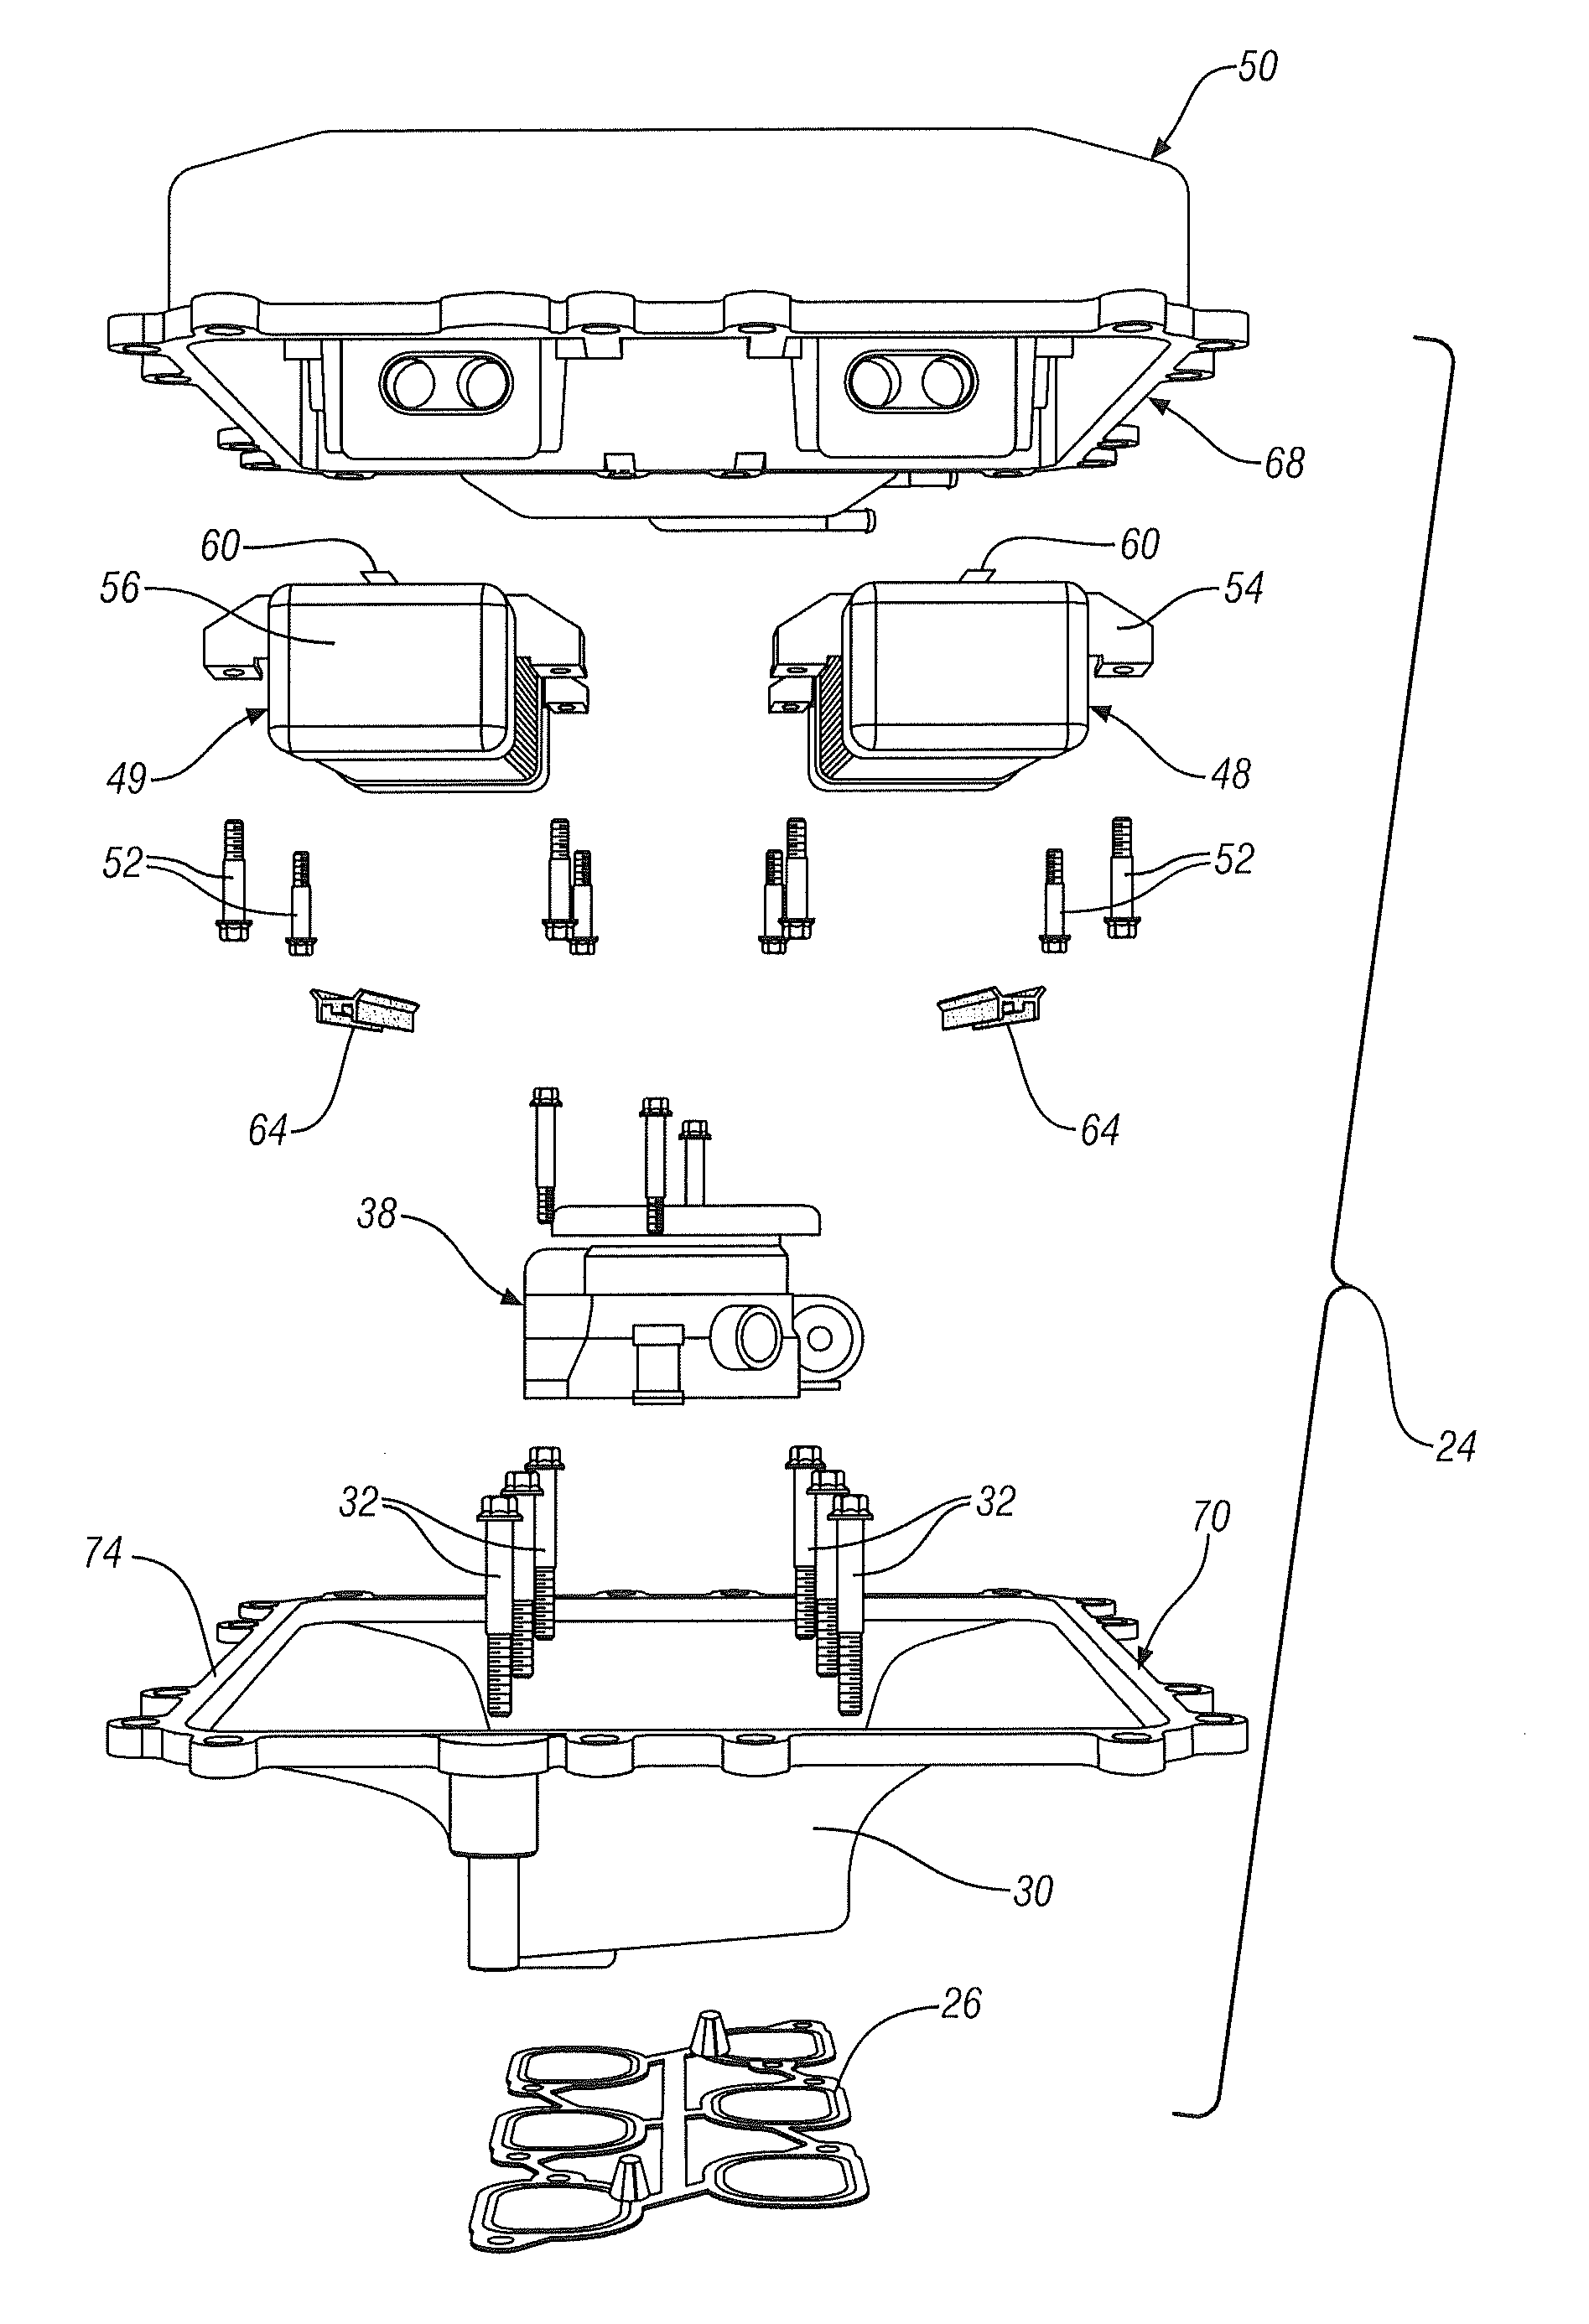 Intake System for an Internal Combustion Engine